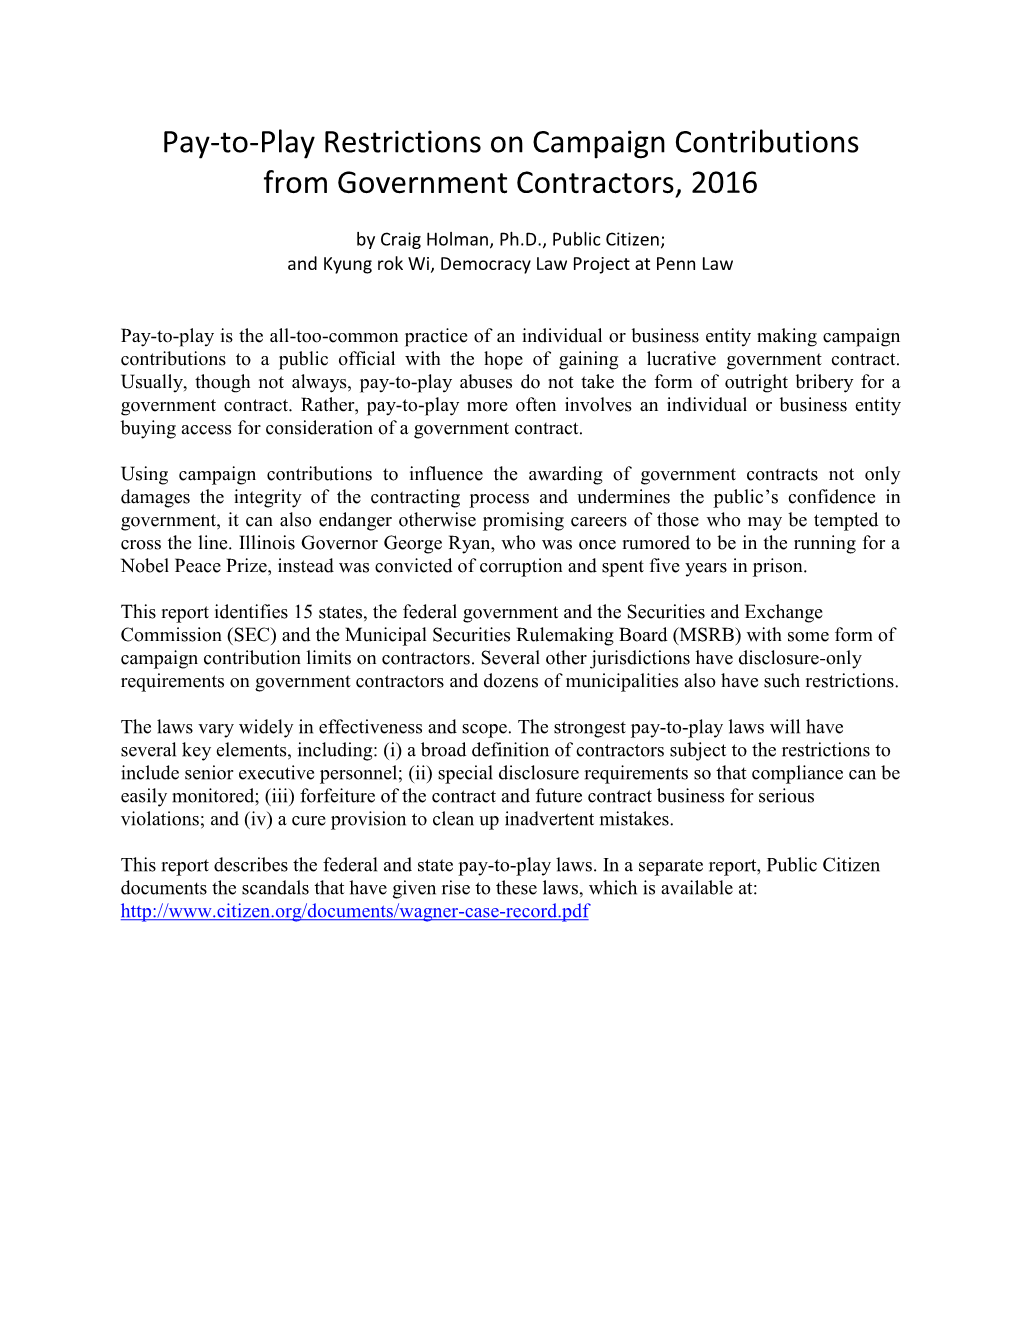 Pay-To-Play Restrictions on Campaign Contributions from Government Contractors, 2016